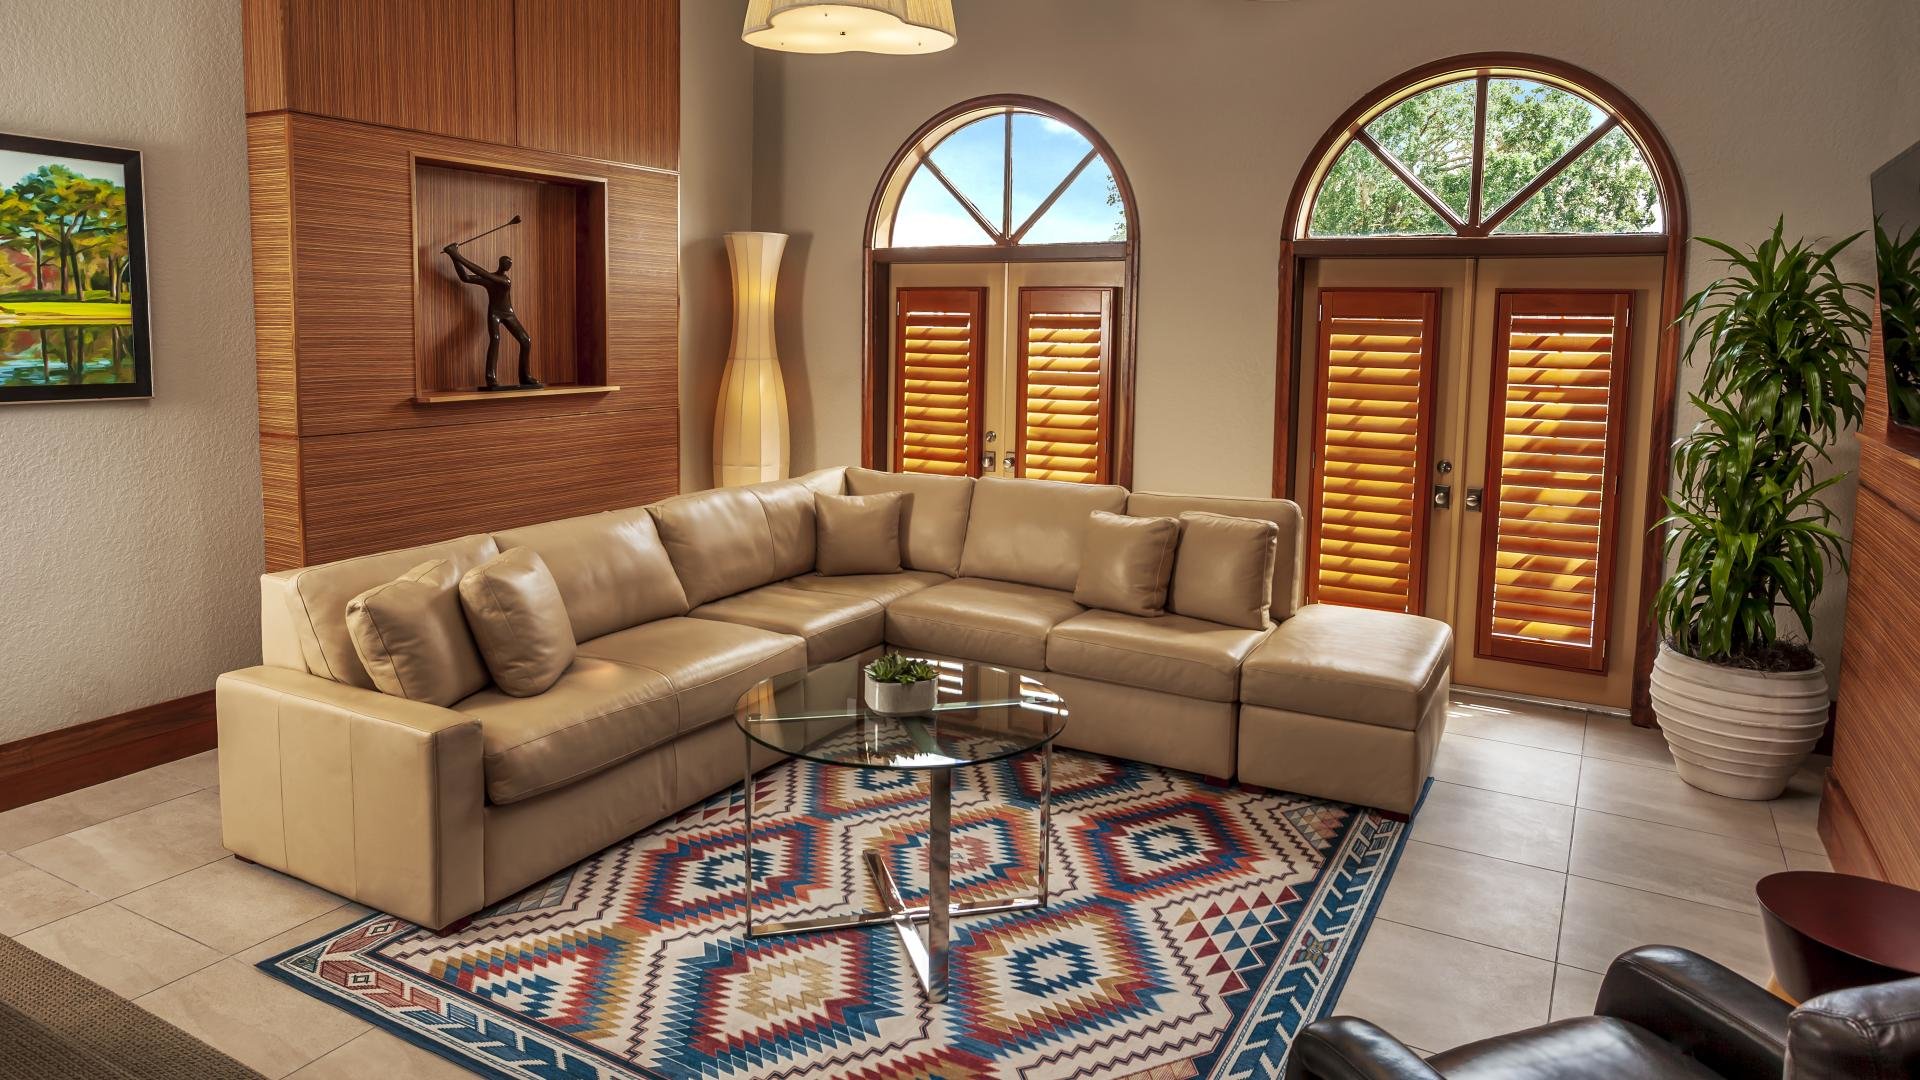 evermore villa living room with brown leather sectional